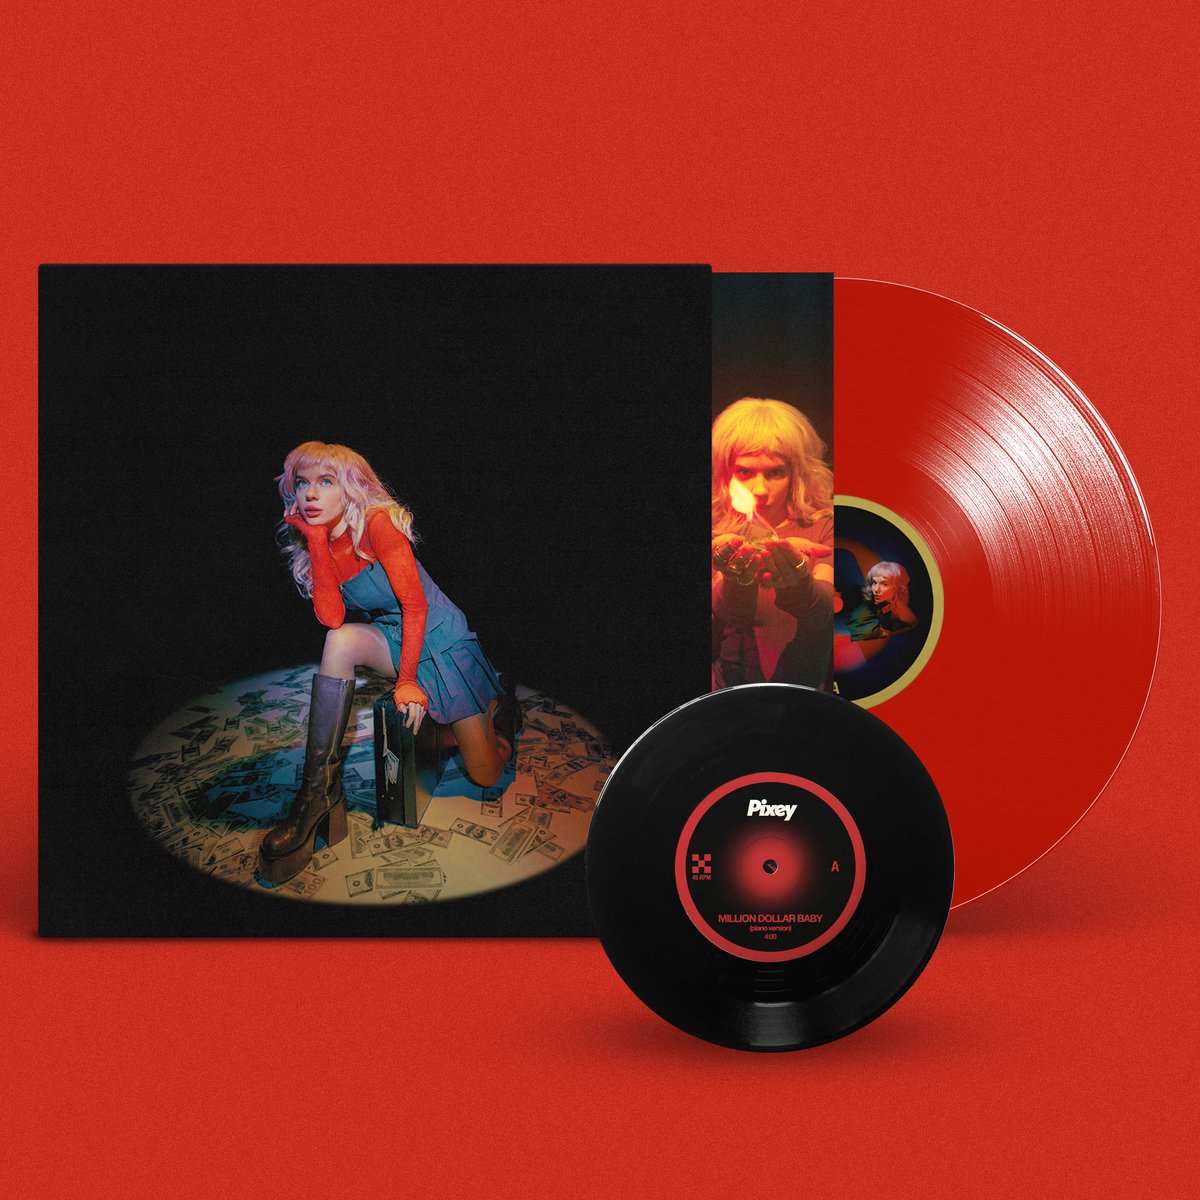 PRE SALE @dinkededition #295 @pixeyofficial - 'Million Dollar Baby' ● Transparent red vinyl * ● Bonus 2 track 7” featuring piano versions * ● Hand-numbered * ● Printed inner sleeve with lyrics ● Limited pressing of 500 * actionrecords.co.uk/buy/million-do…